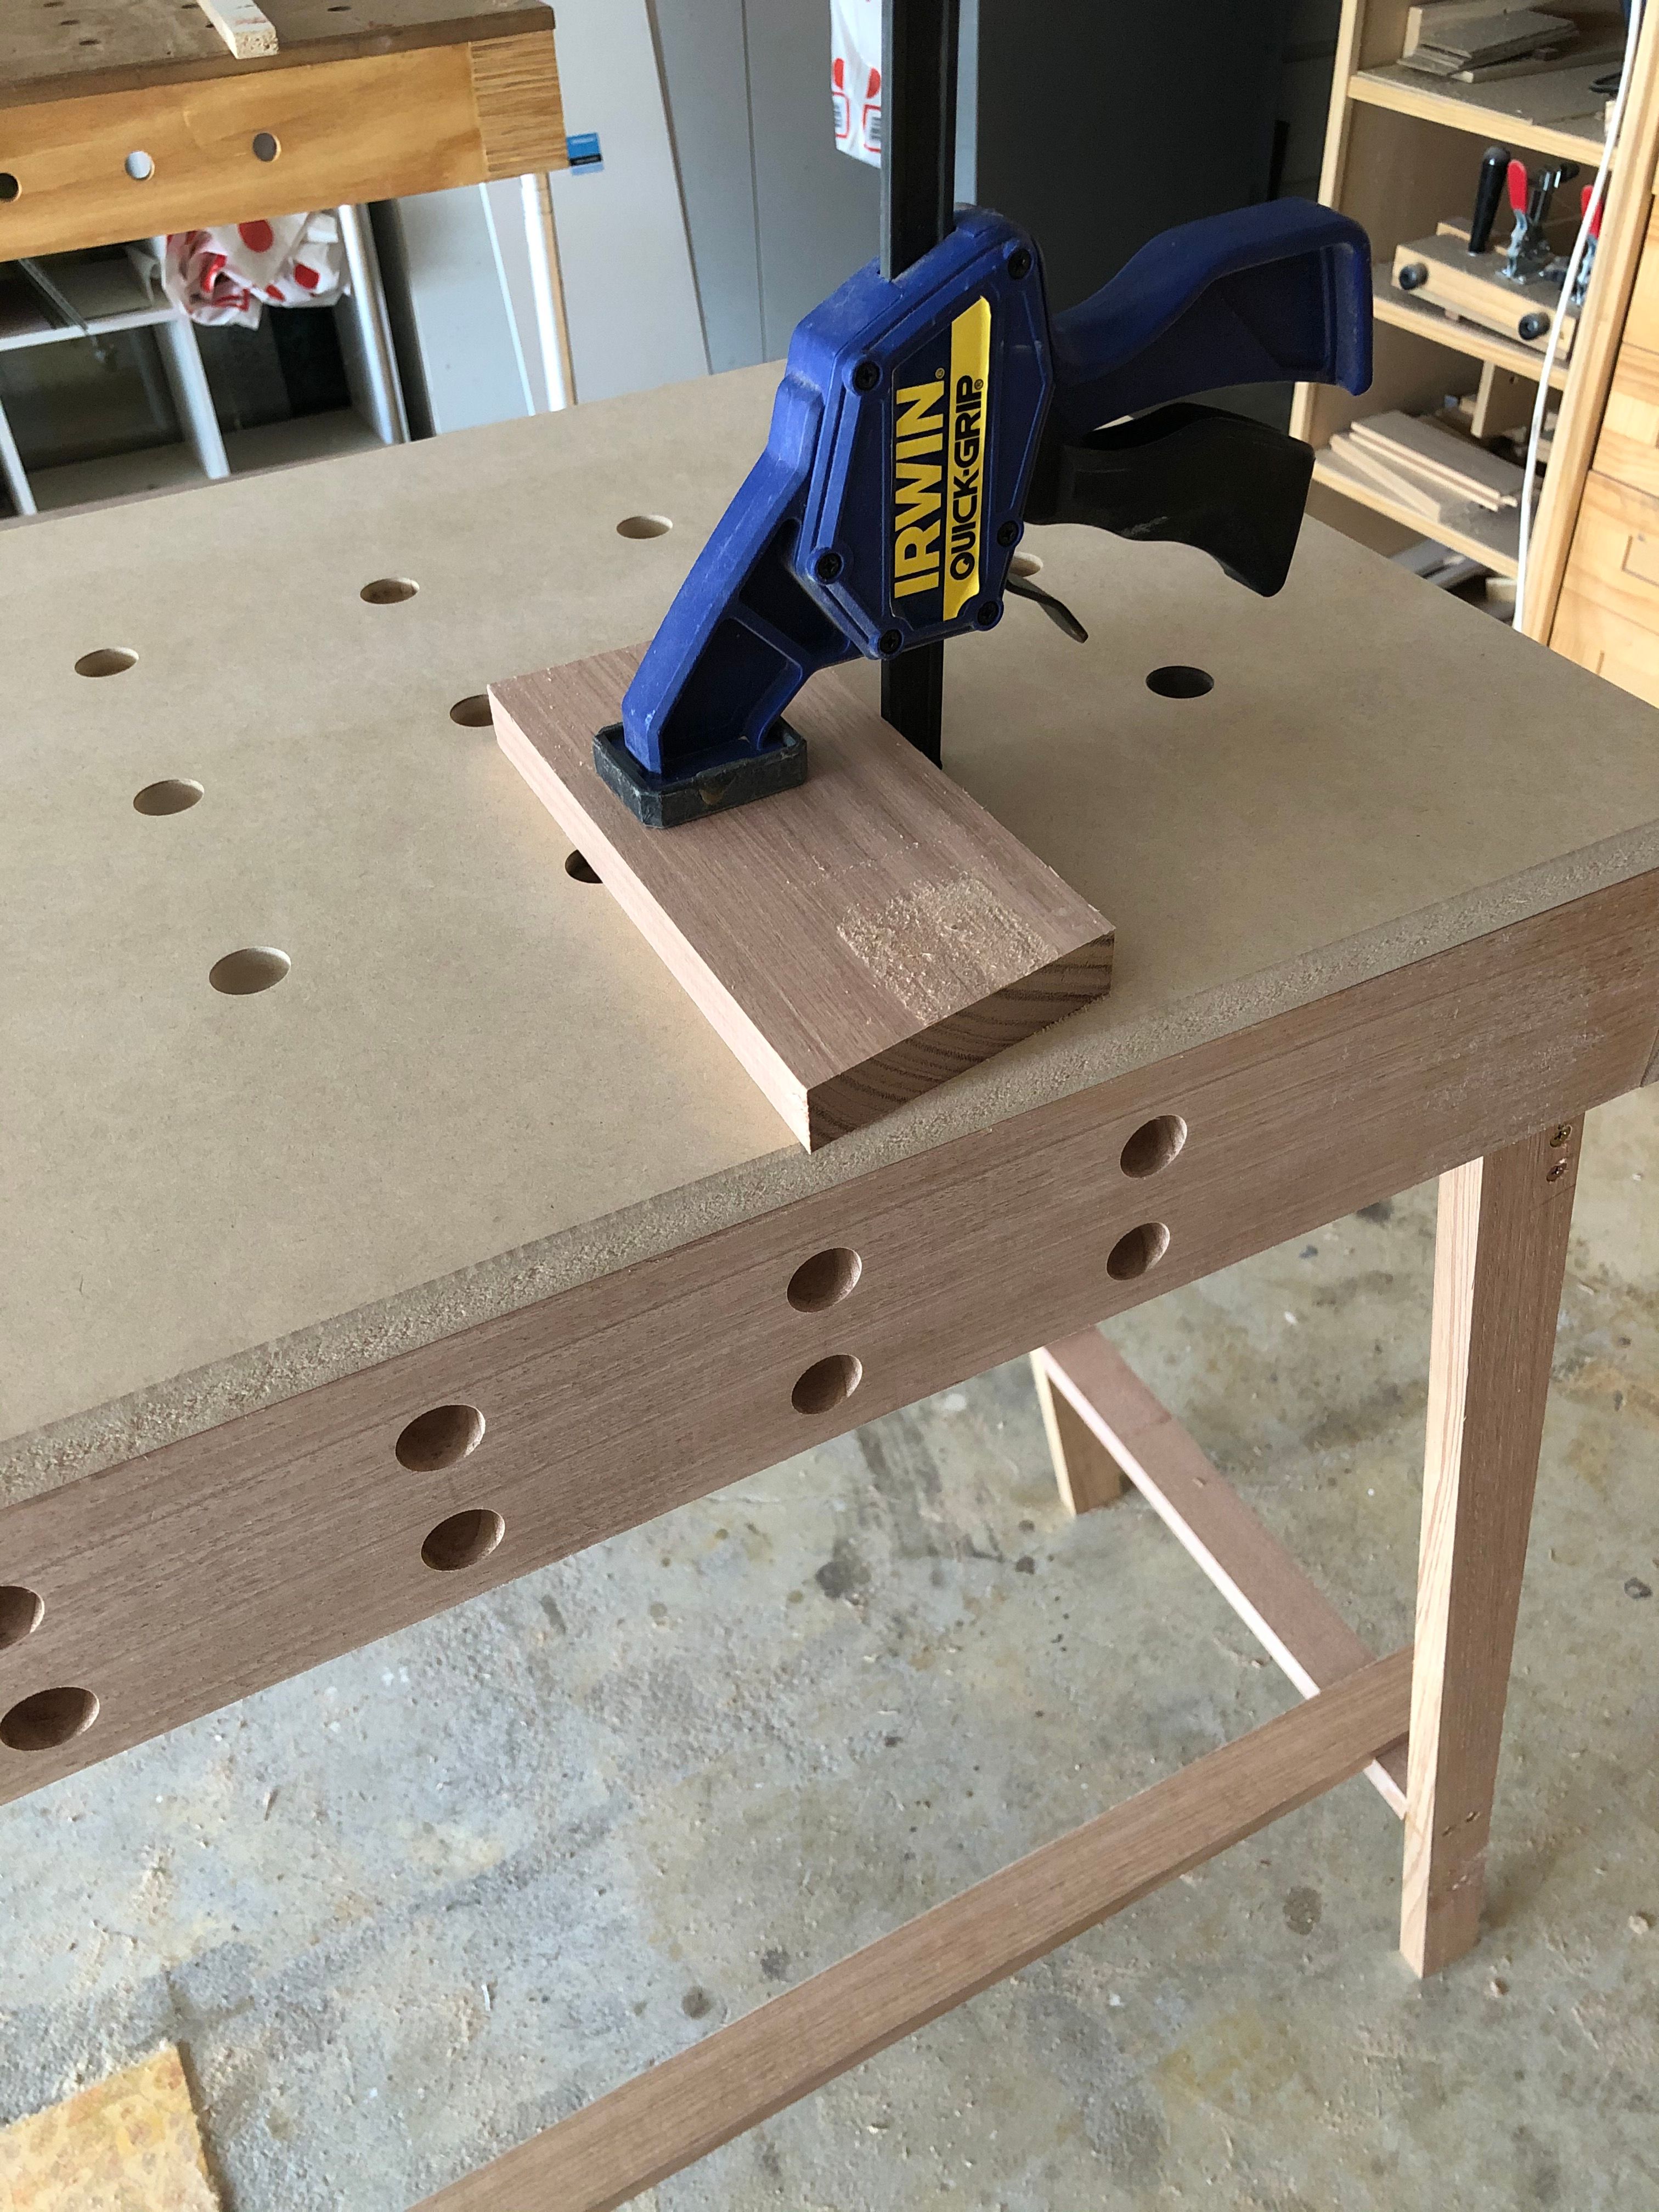 Portable small work table, 900mm long x | Bunnings Workshop community